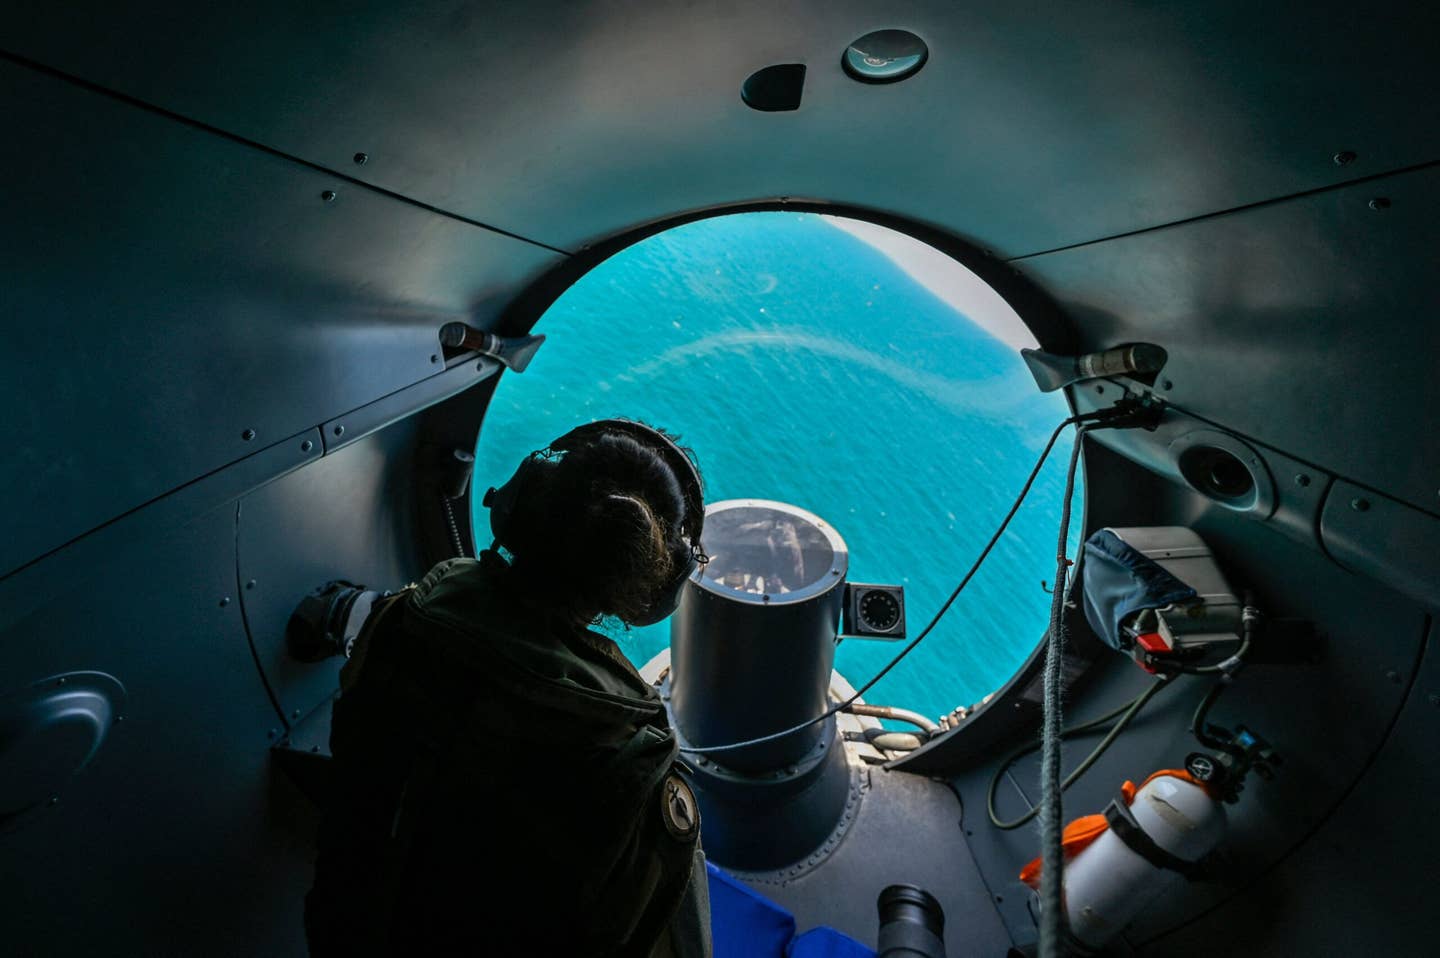 A crew member watches from onboard an Atlantique 2 as it flies over the Black Sea on July 21, 2022. The ‘Mark One Eyeball’ remains a vital surveillance tool and the glass nose affords an excellent view. <em>Photo by LOUISA GOULIAMAKI/AFP via Getty Images</em>